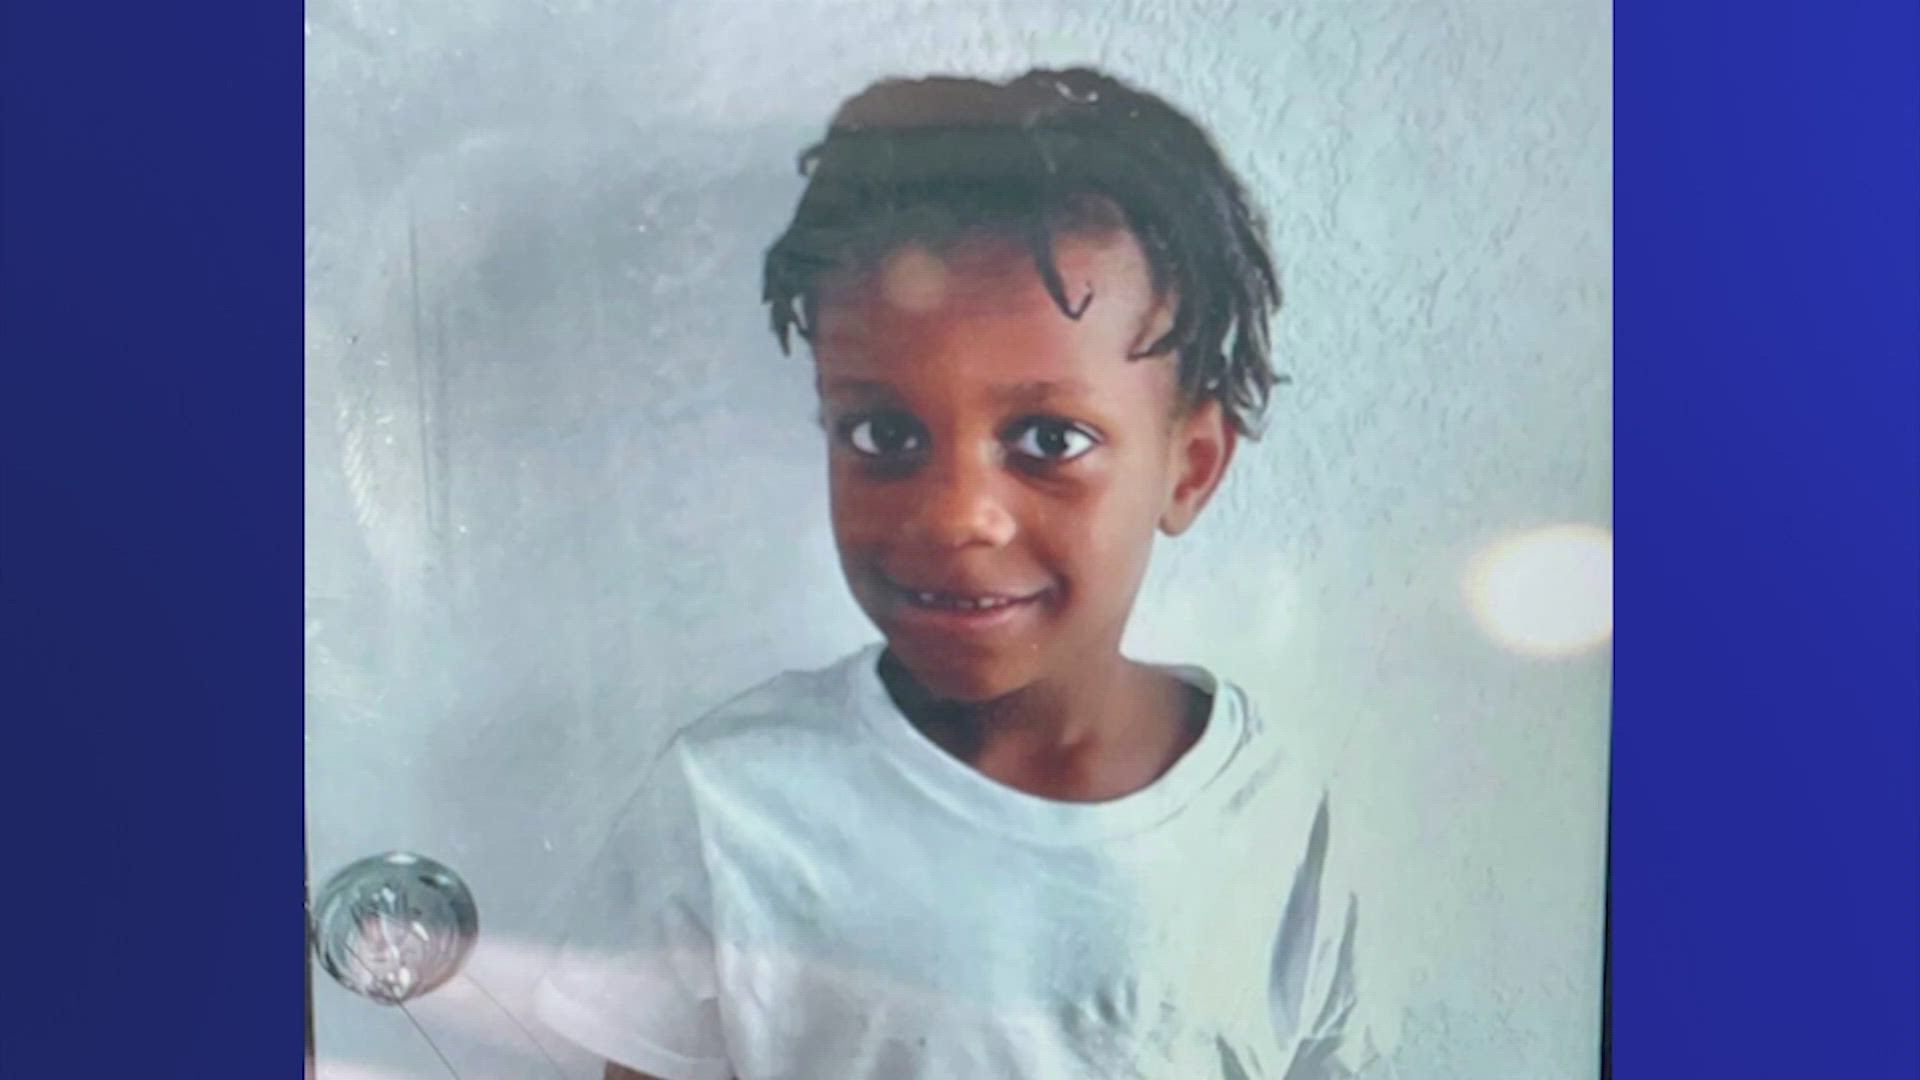 A body was found Thursday night in the search for a missing child who wandered away from his home earlier in the day, according to Sheriff Ed Gonzalez.